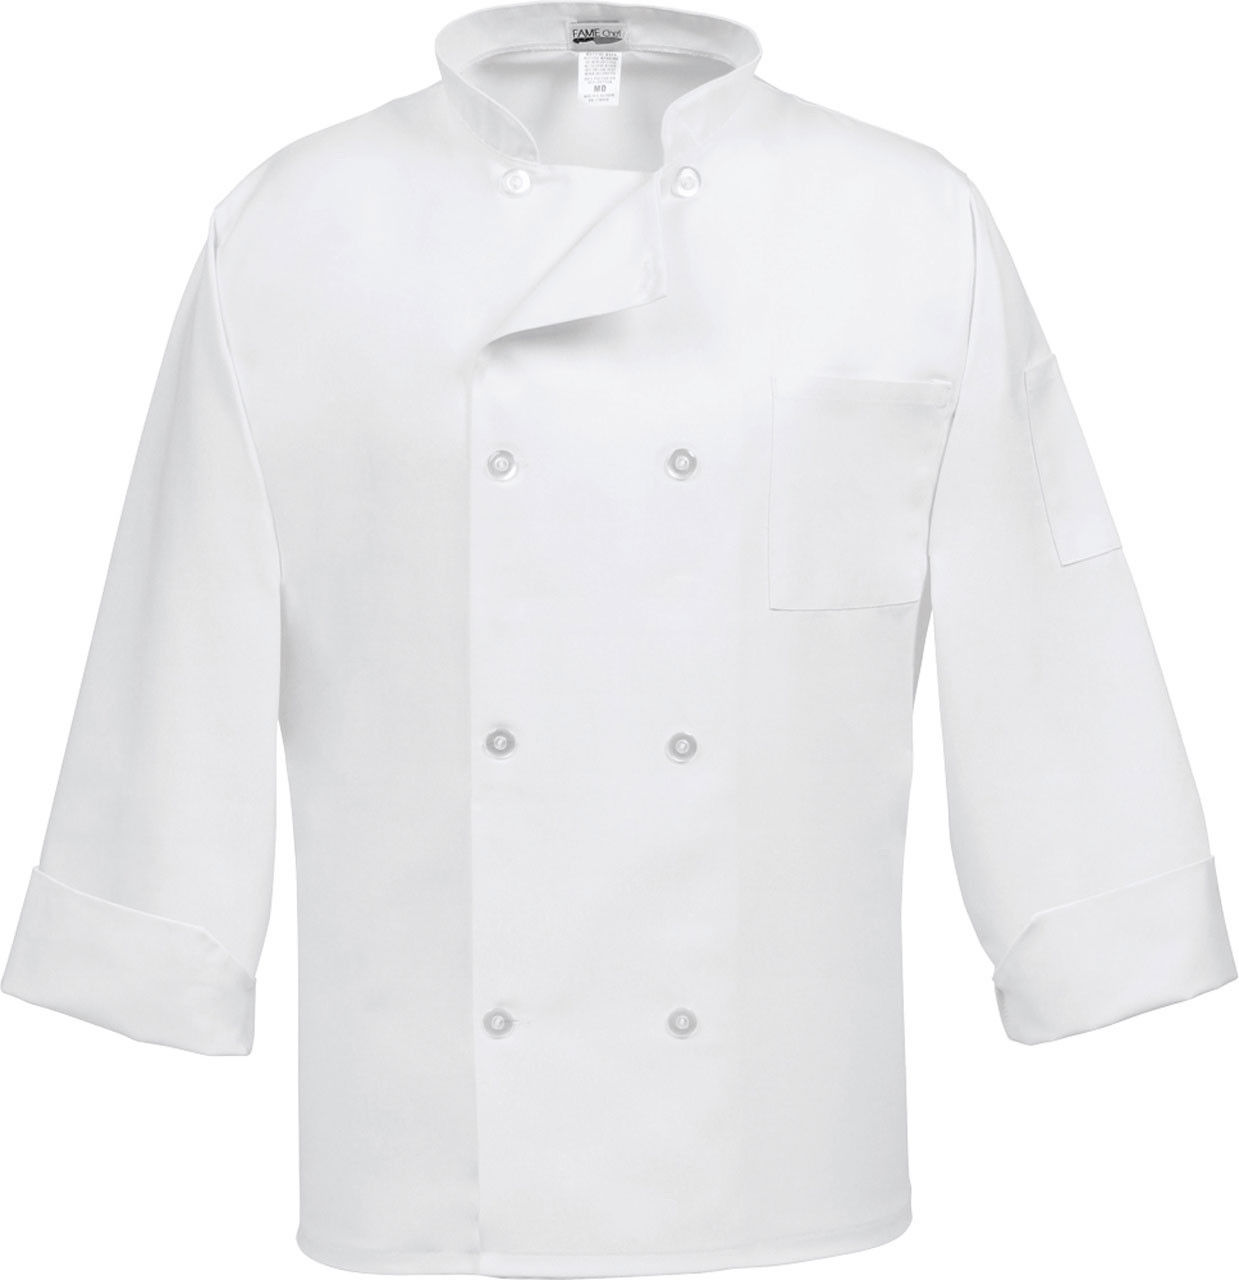 Where is this 8 button chef coat shipped from before purchase?